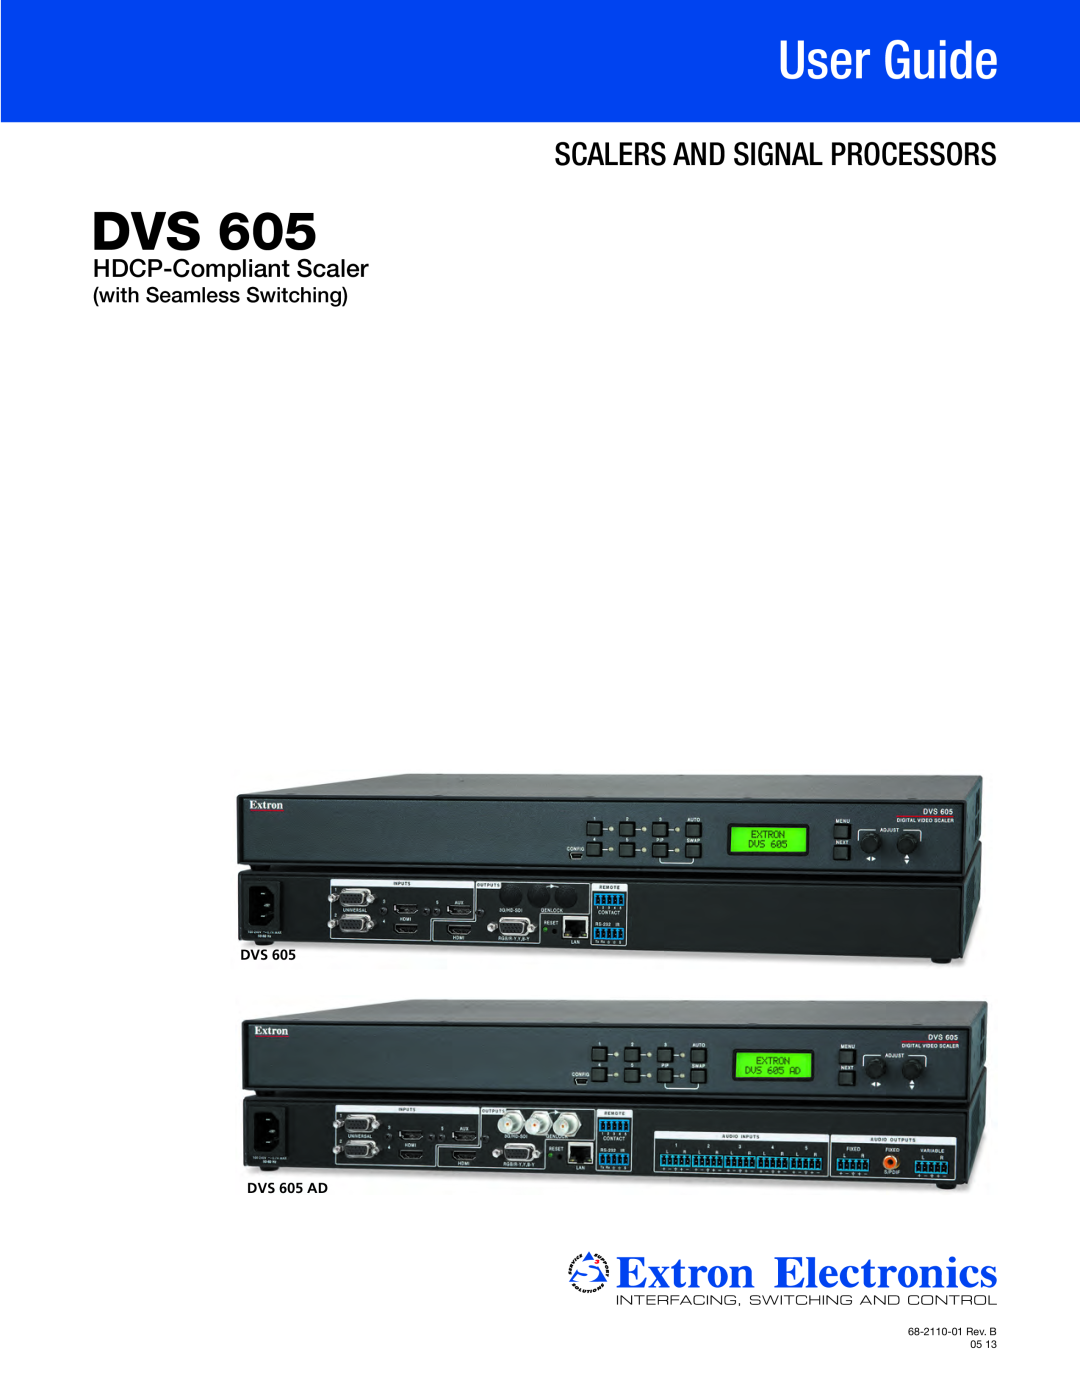 Extron electronic setup guide DVS 605 Setup Guide, Installation, Rear Panel Features, Mounting and Cabling, Rack Mount 